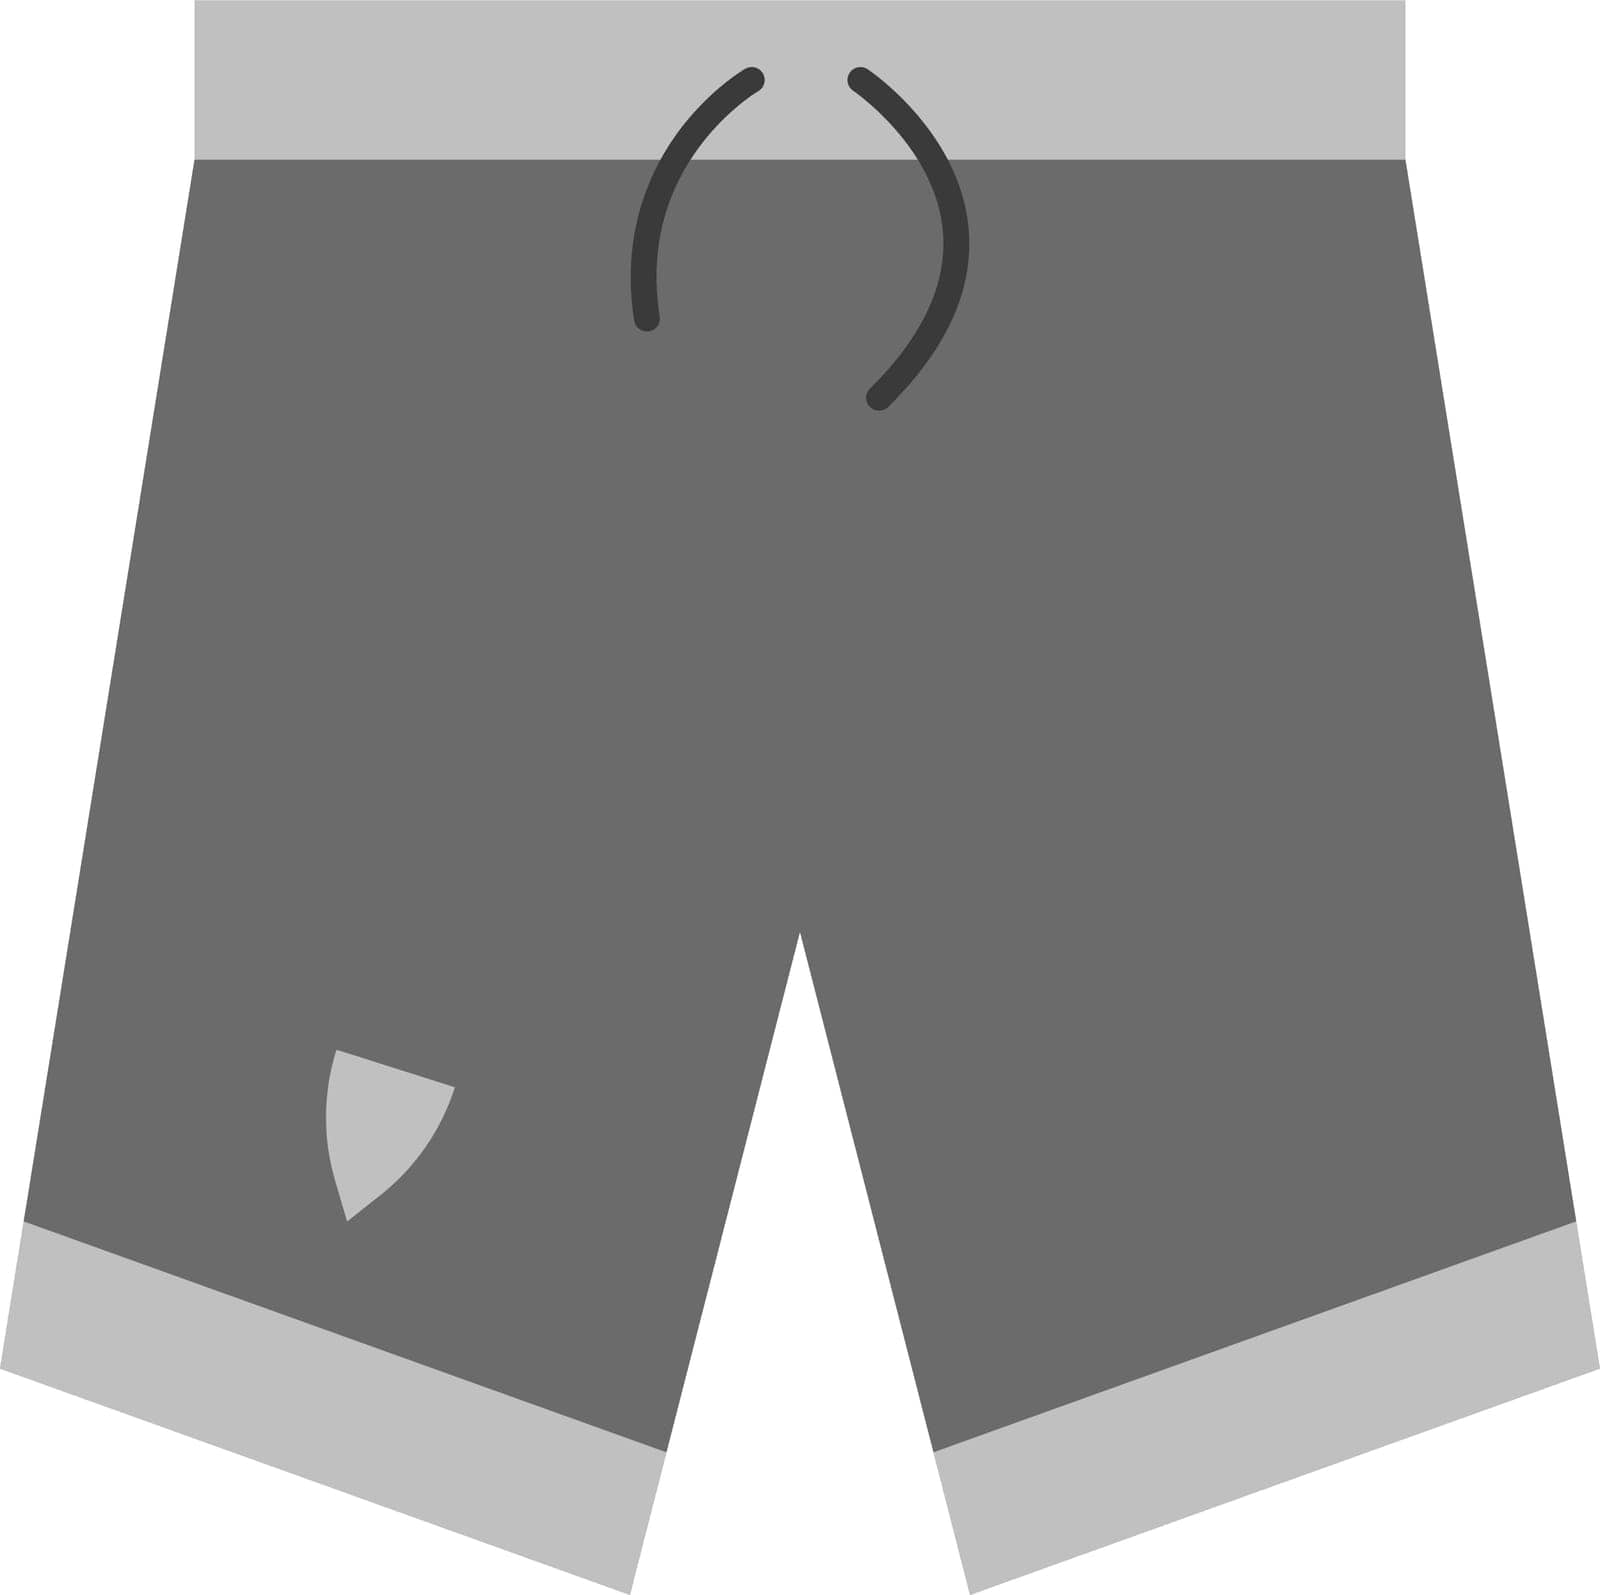 Shorts icon vector image. Suitable for mobile application web application and print media.